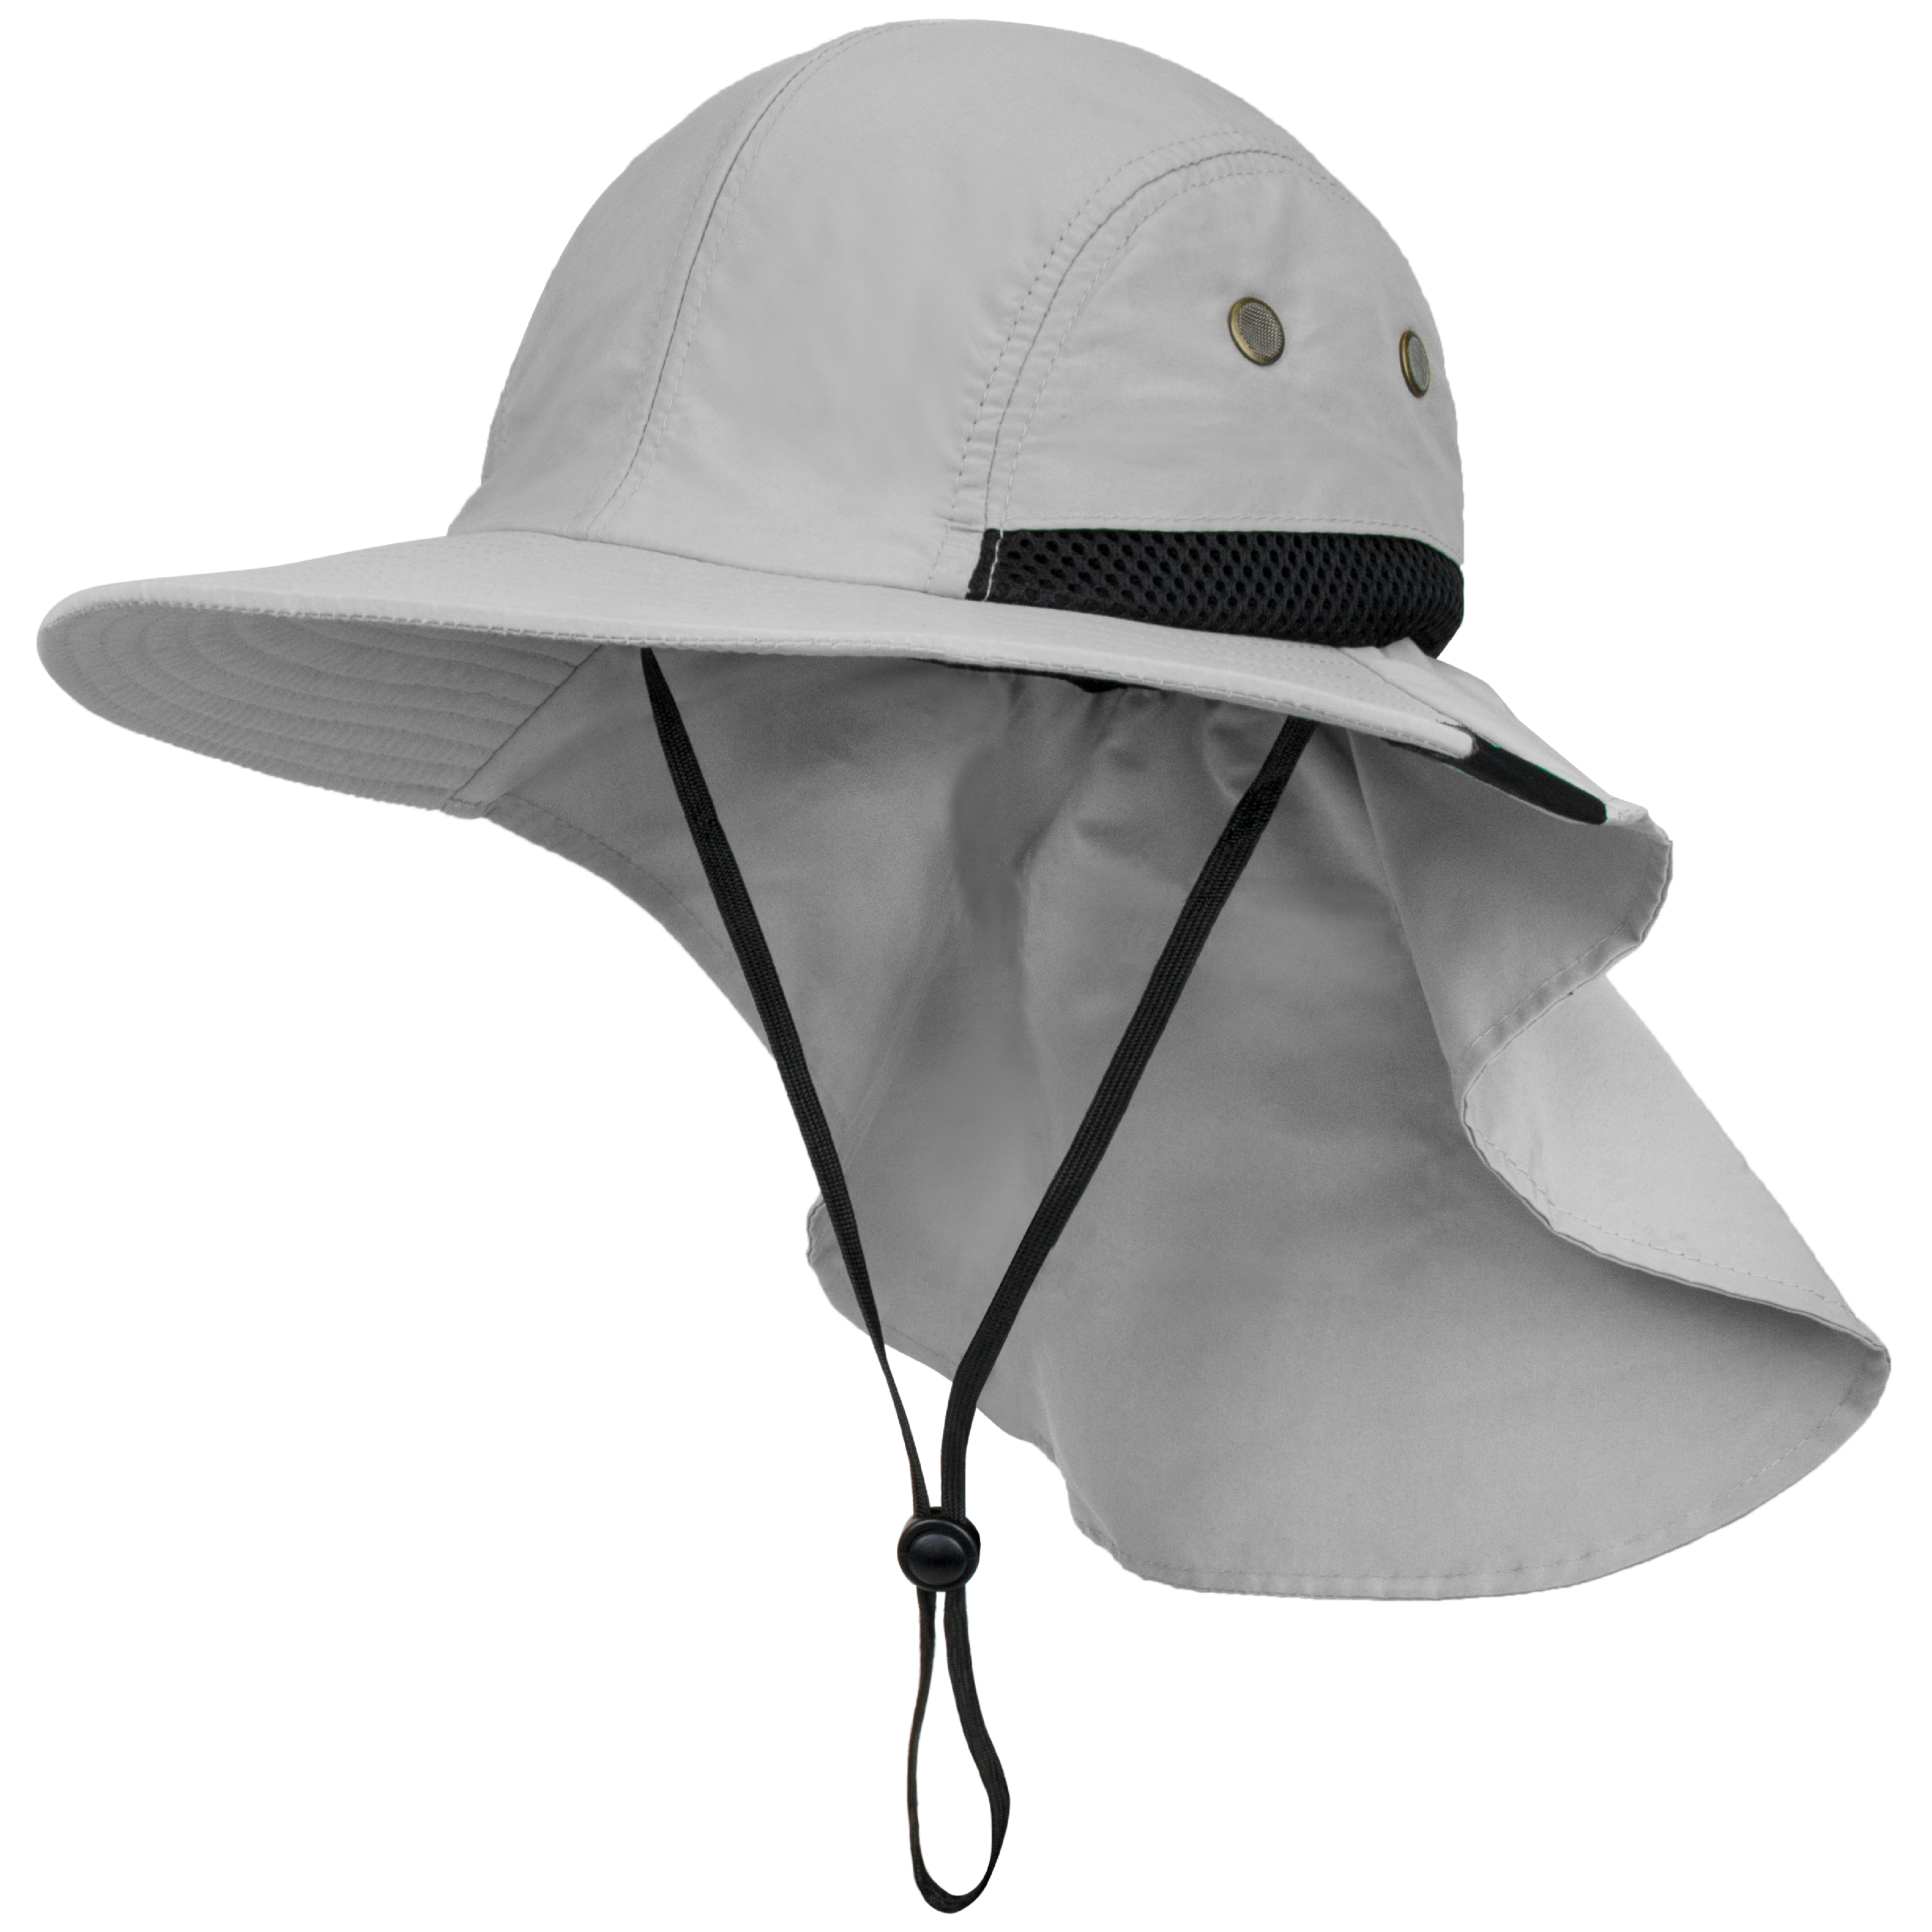 Popular Unisex Sun Wide Brim Fishing Hat with Neck Flap for Hiking Camping Cap 